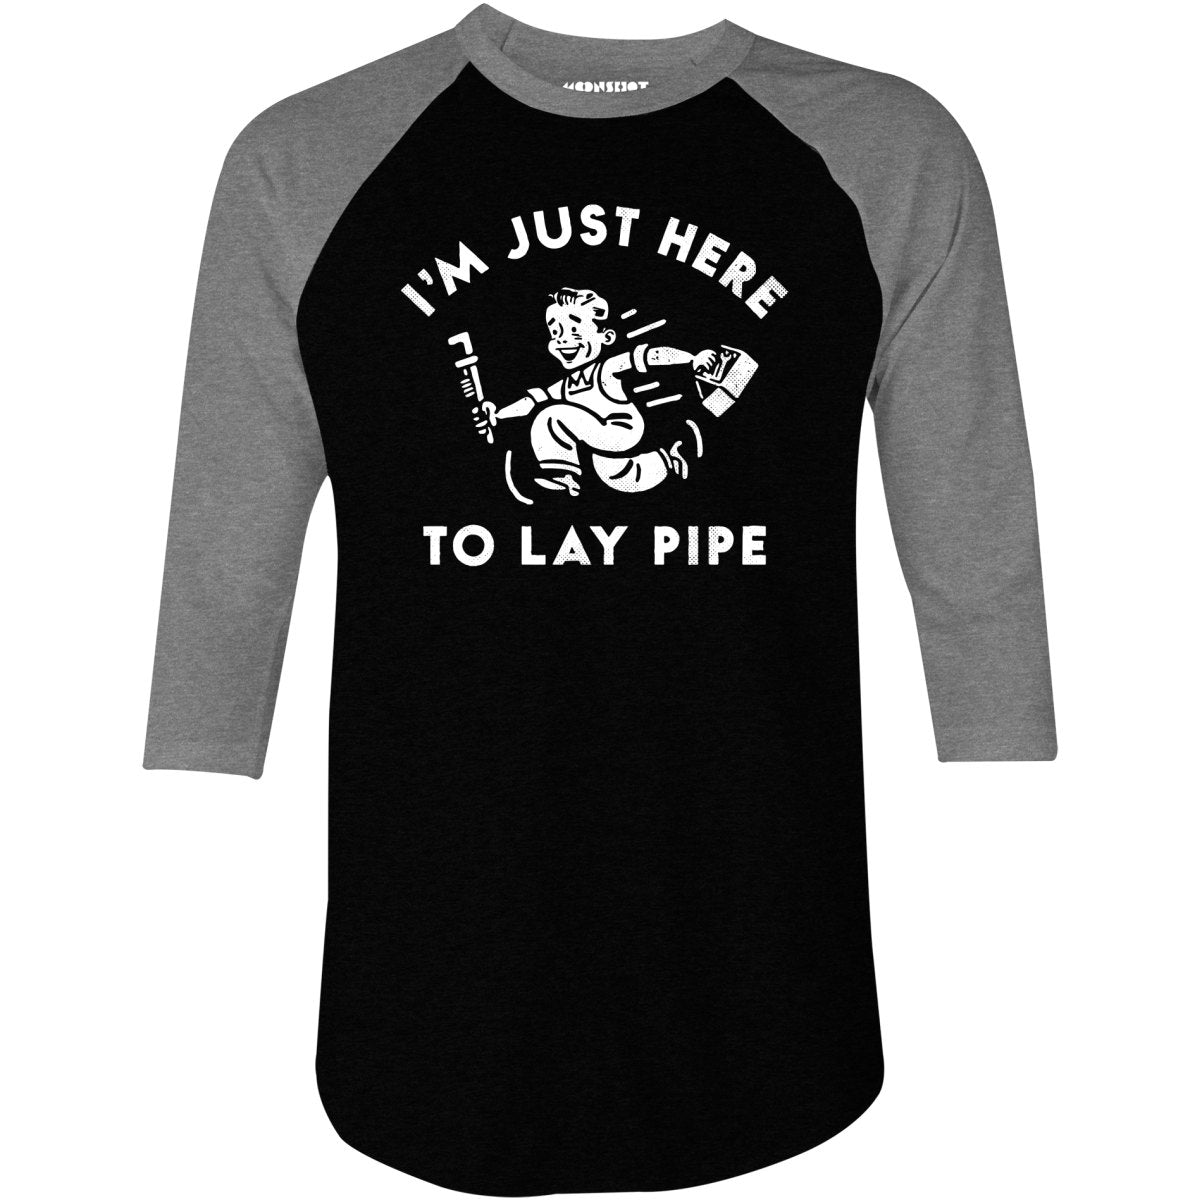 I'm Just Here to Lay Pipe - 3/4 Sleeve Raglan T-Shirt